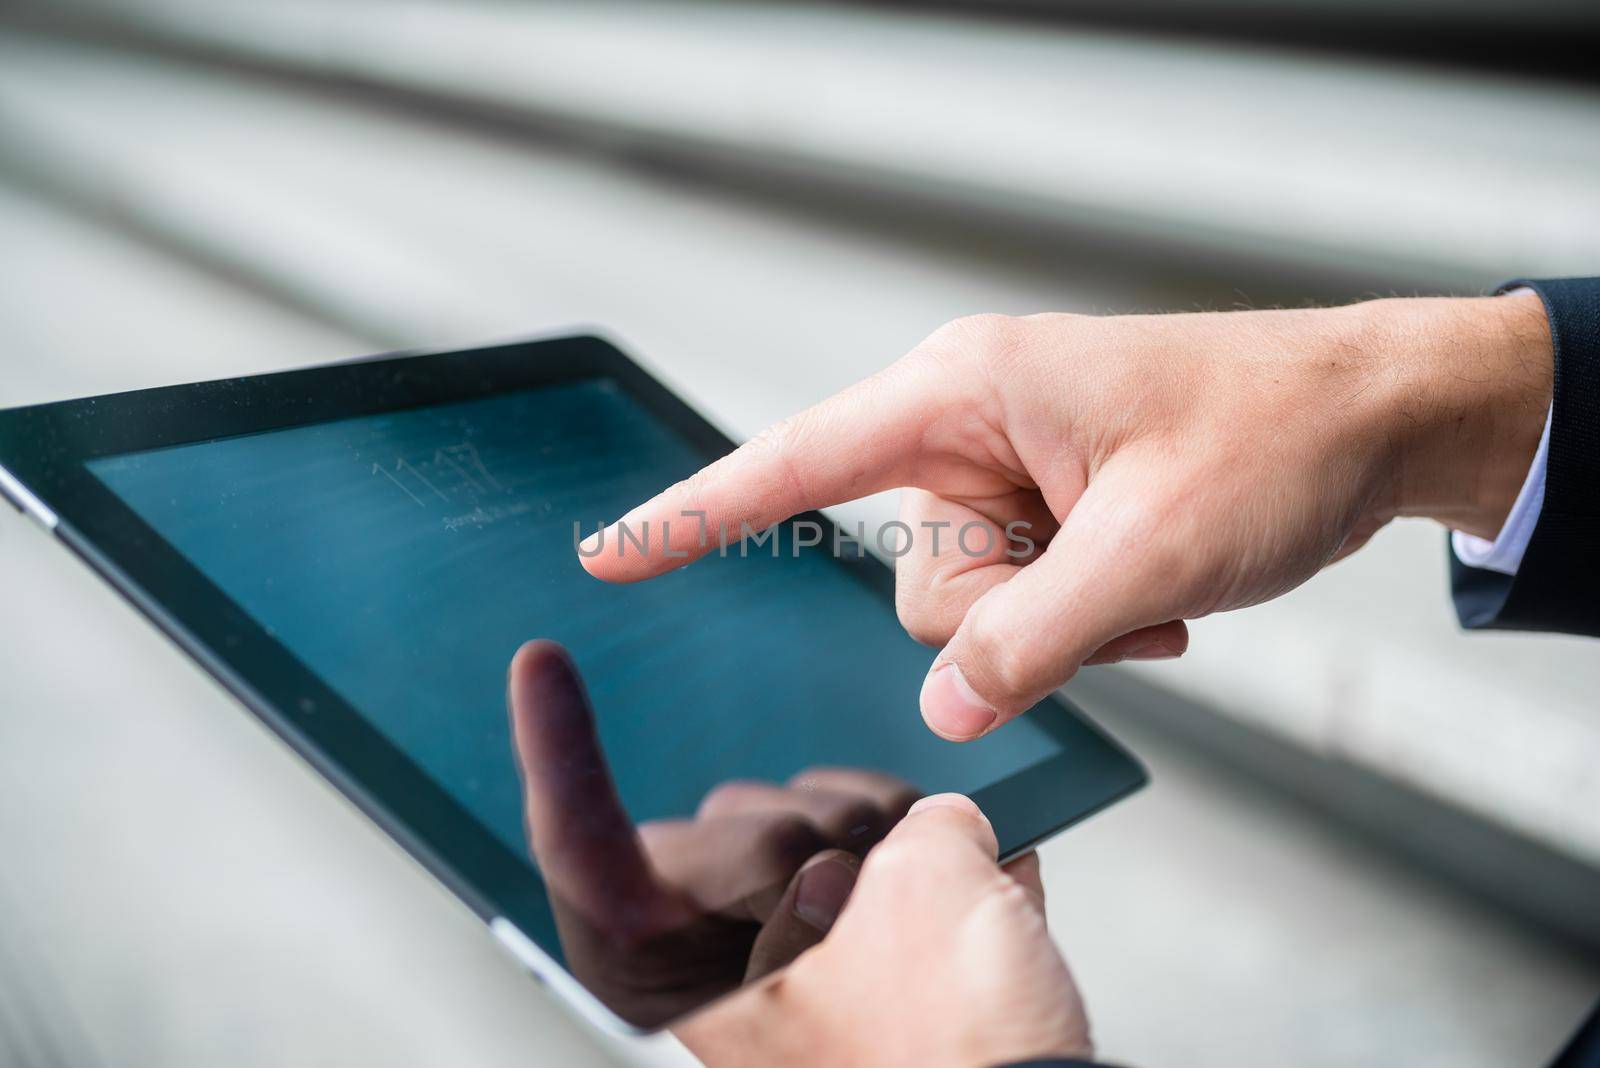 Businessman navigating on a tablet computer using his finger on the touchscreen as he surfs the internet, close up view